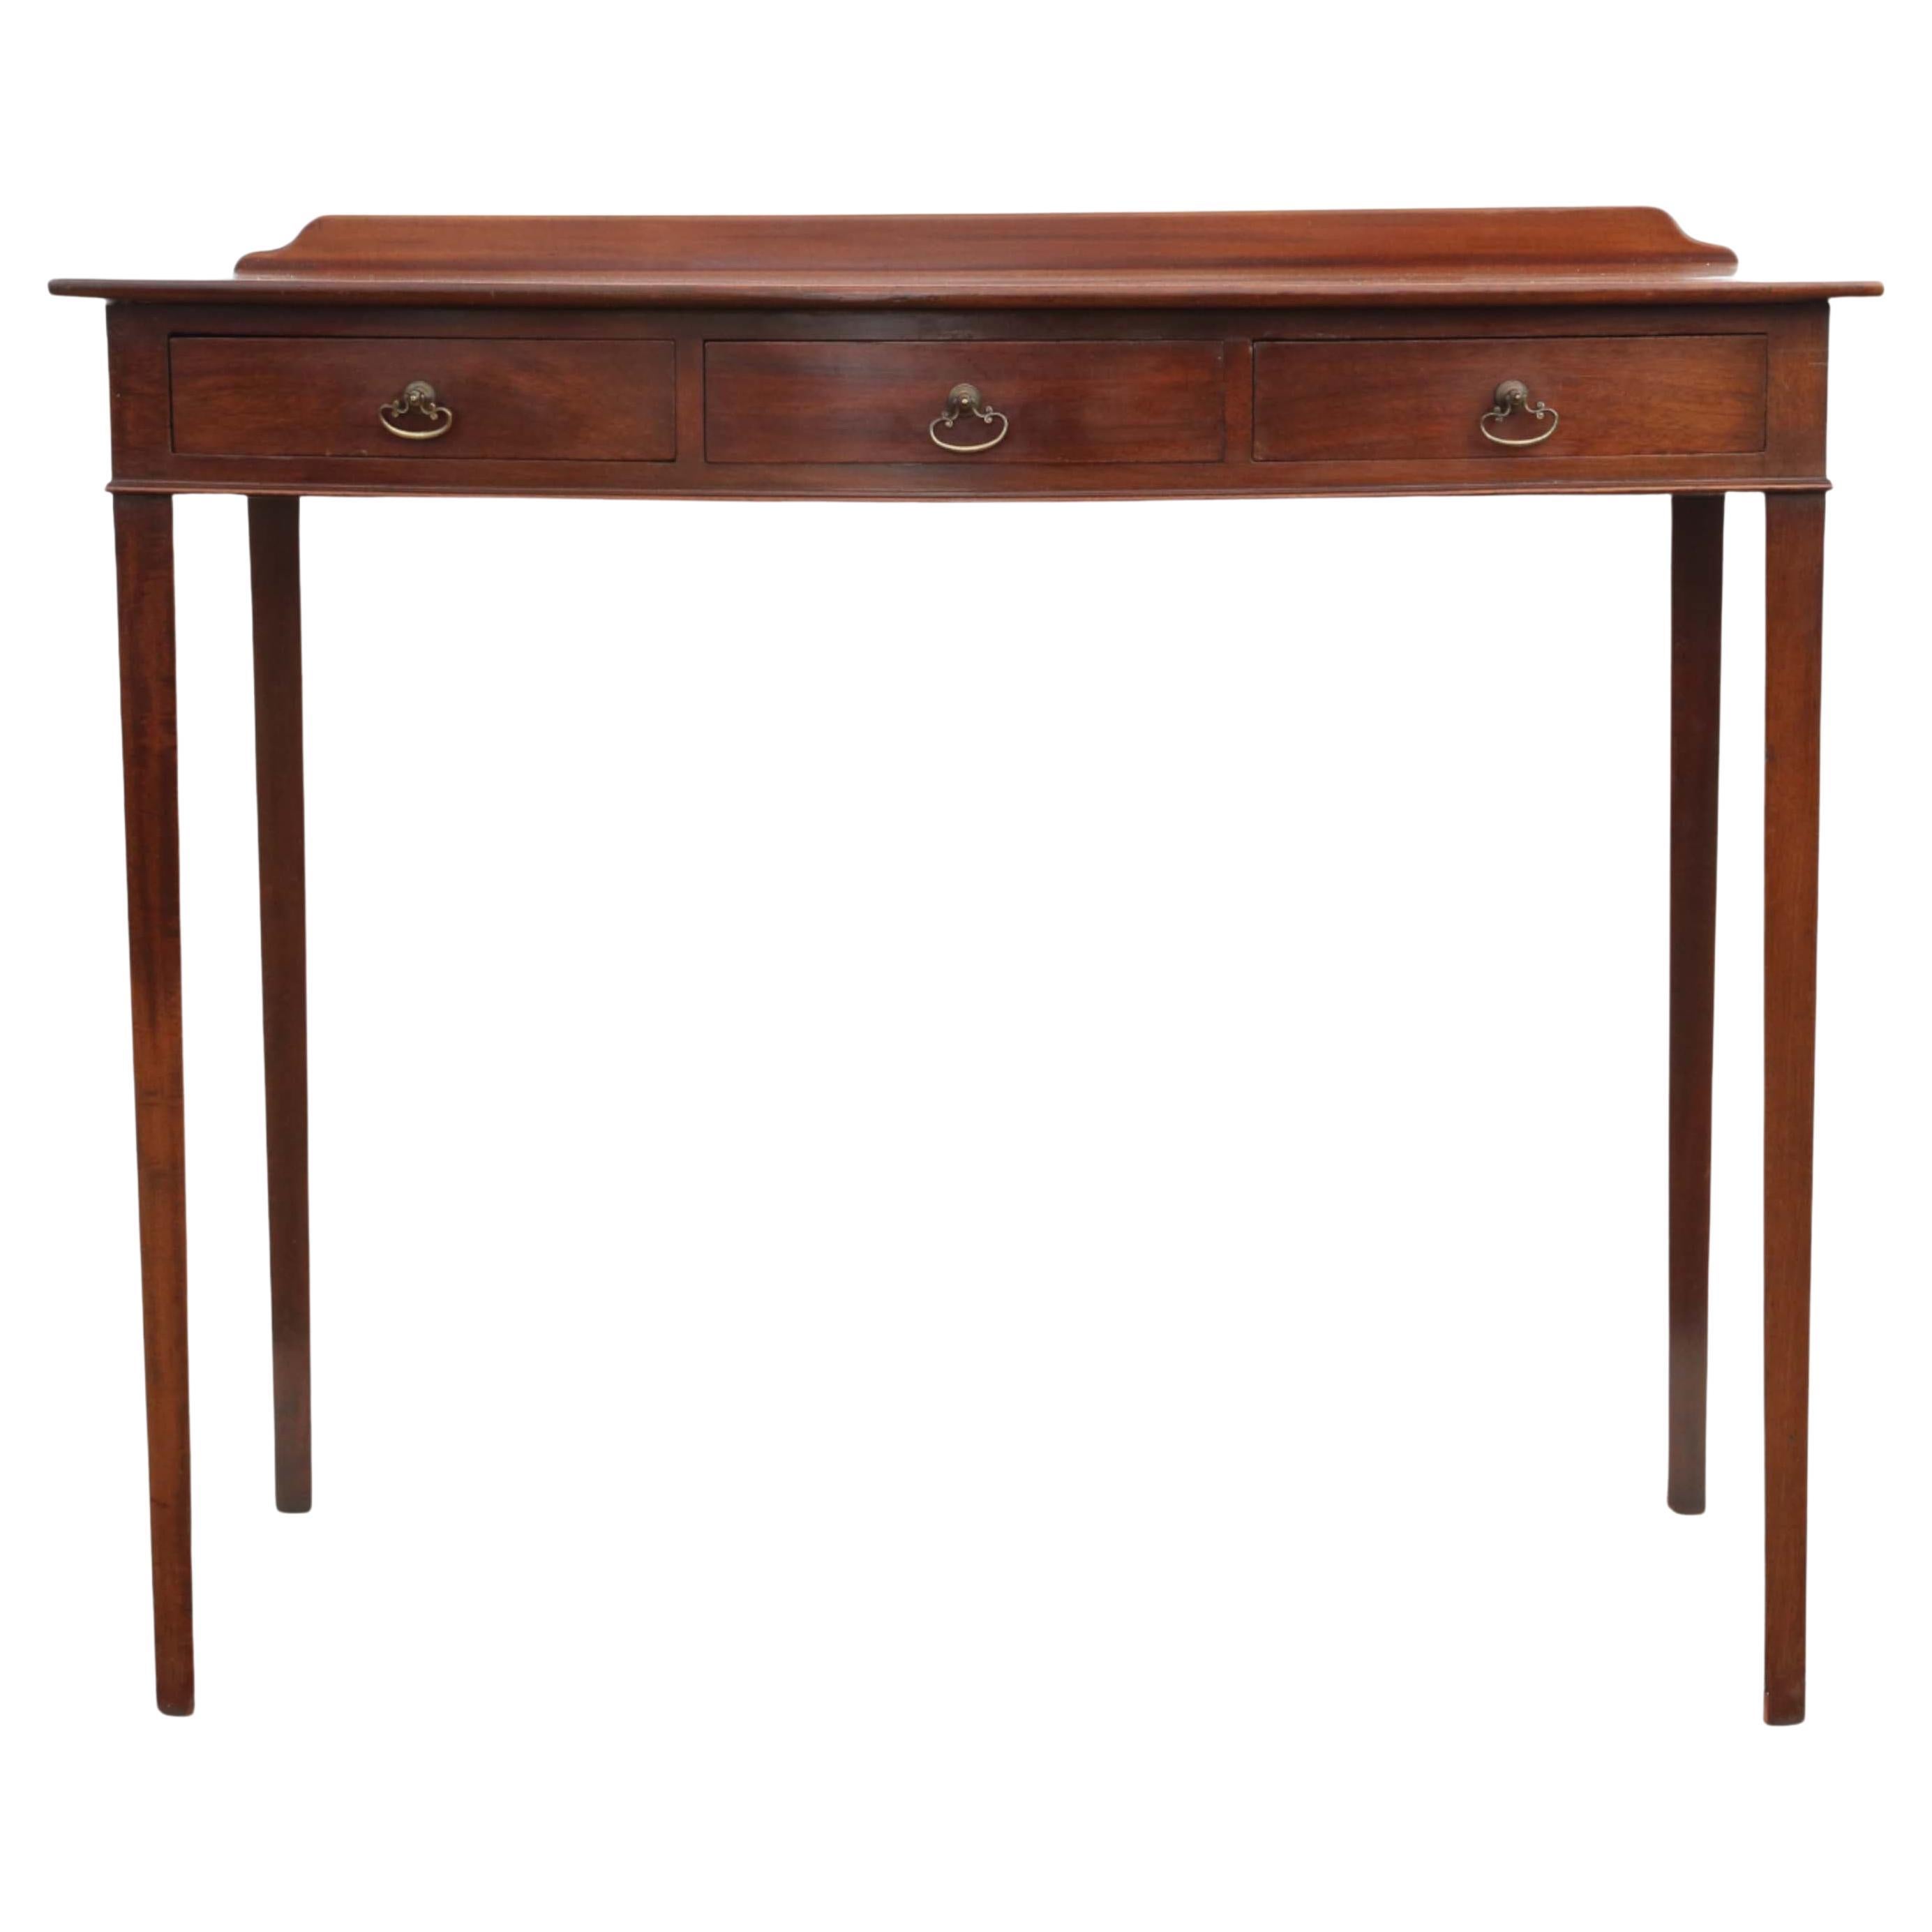 Antique fine quality 19th Century bow front mahogany writing dressing table desk